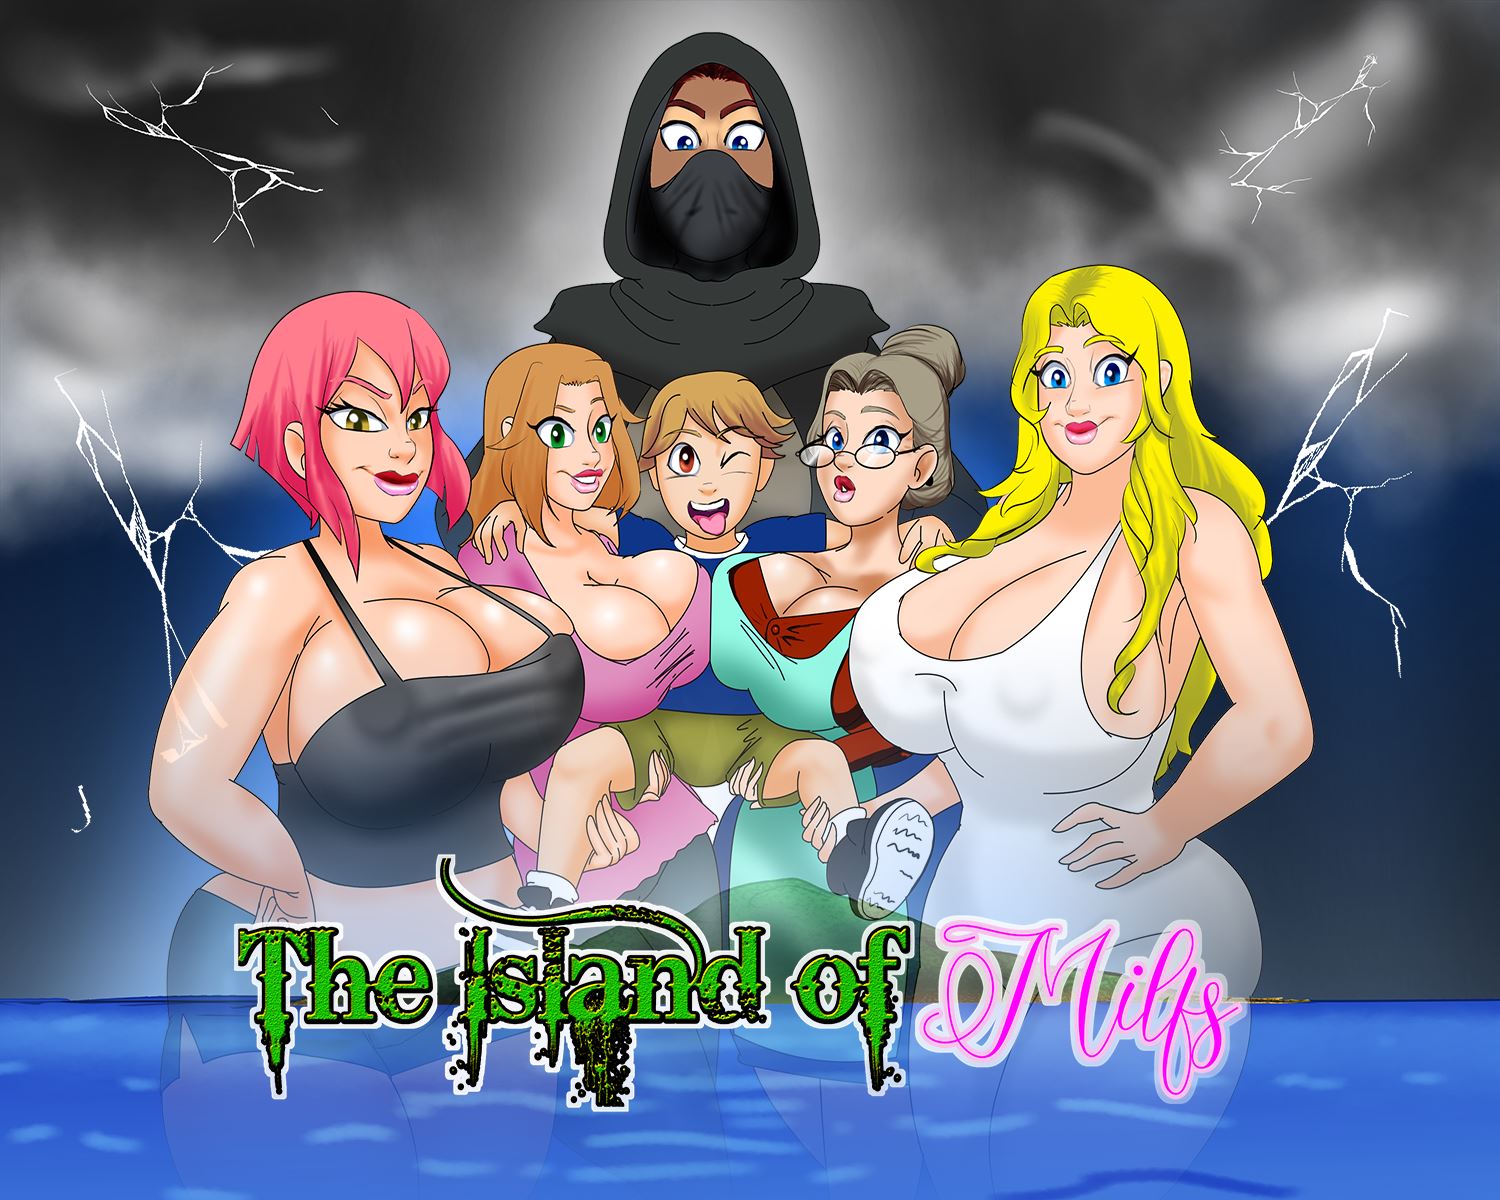 Naked Milf Games - RPGM] The Island of Milfs - v0.10 by Inocless 18+ Adult xxx Porn Game  Download